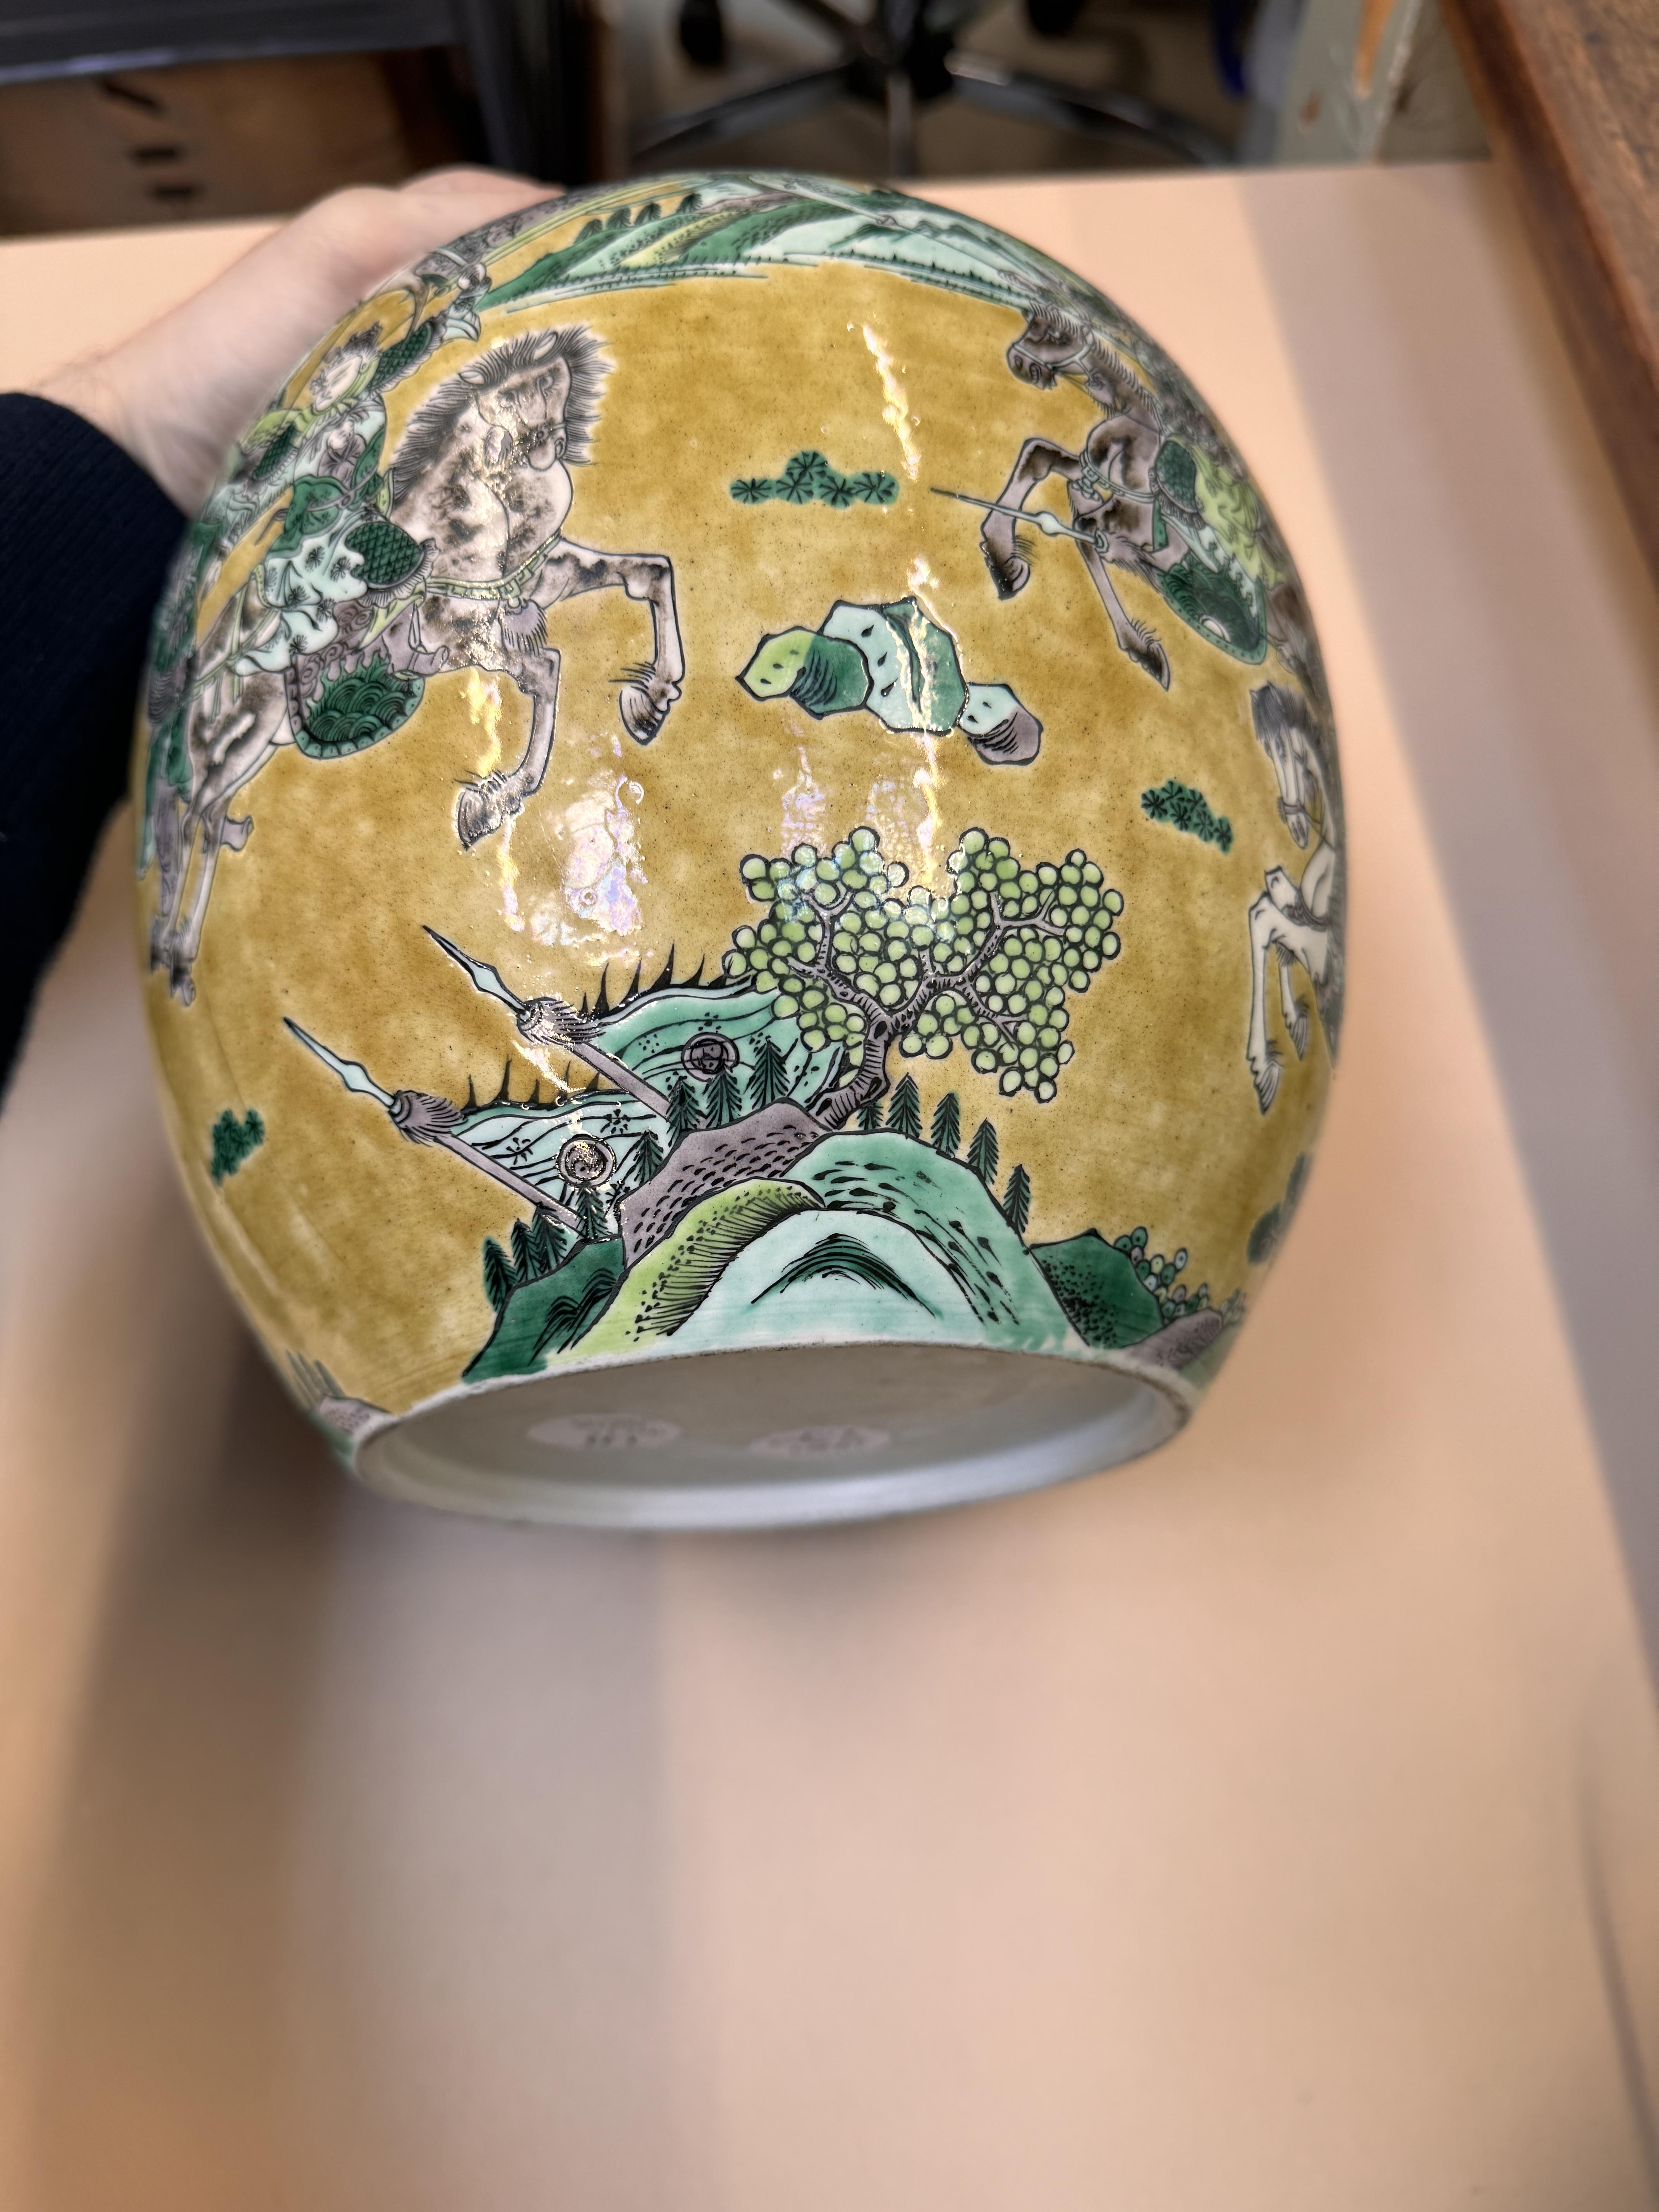 A PAIR OF CHINESE FAMILLE-JAUNE JARS AND COVERS 清十九世紀 三彩勇戰圖紋蓋罐一對 - Image 18 of 37